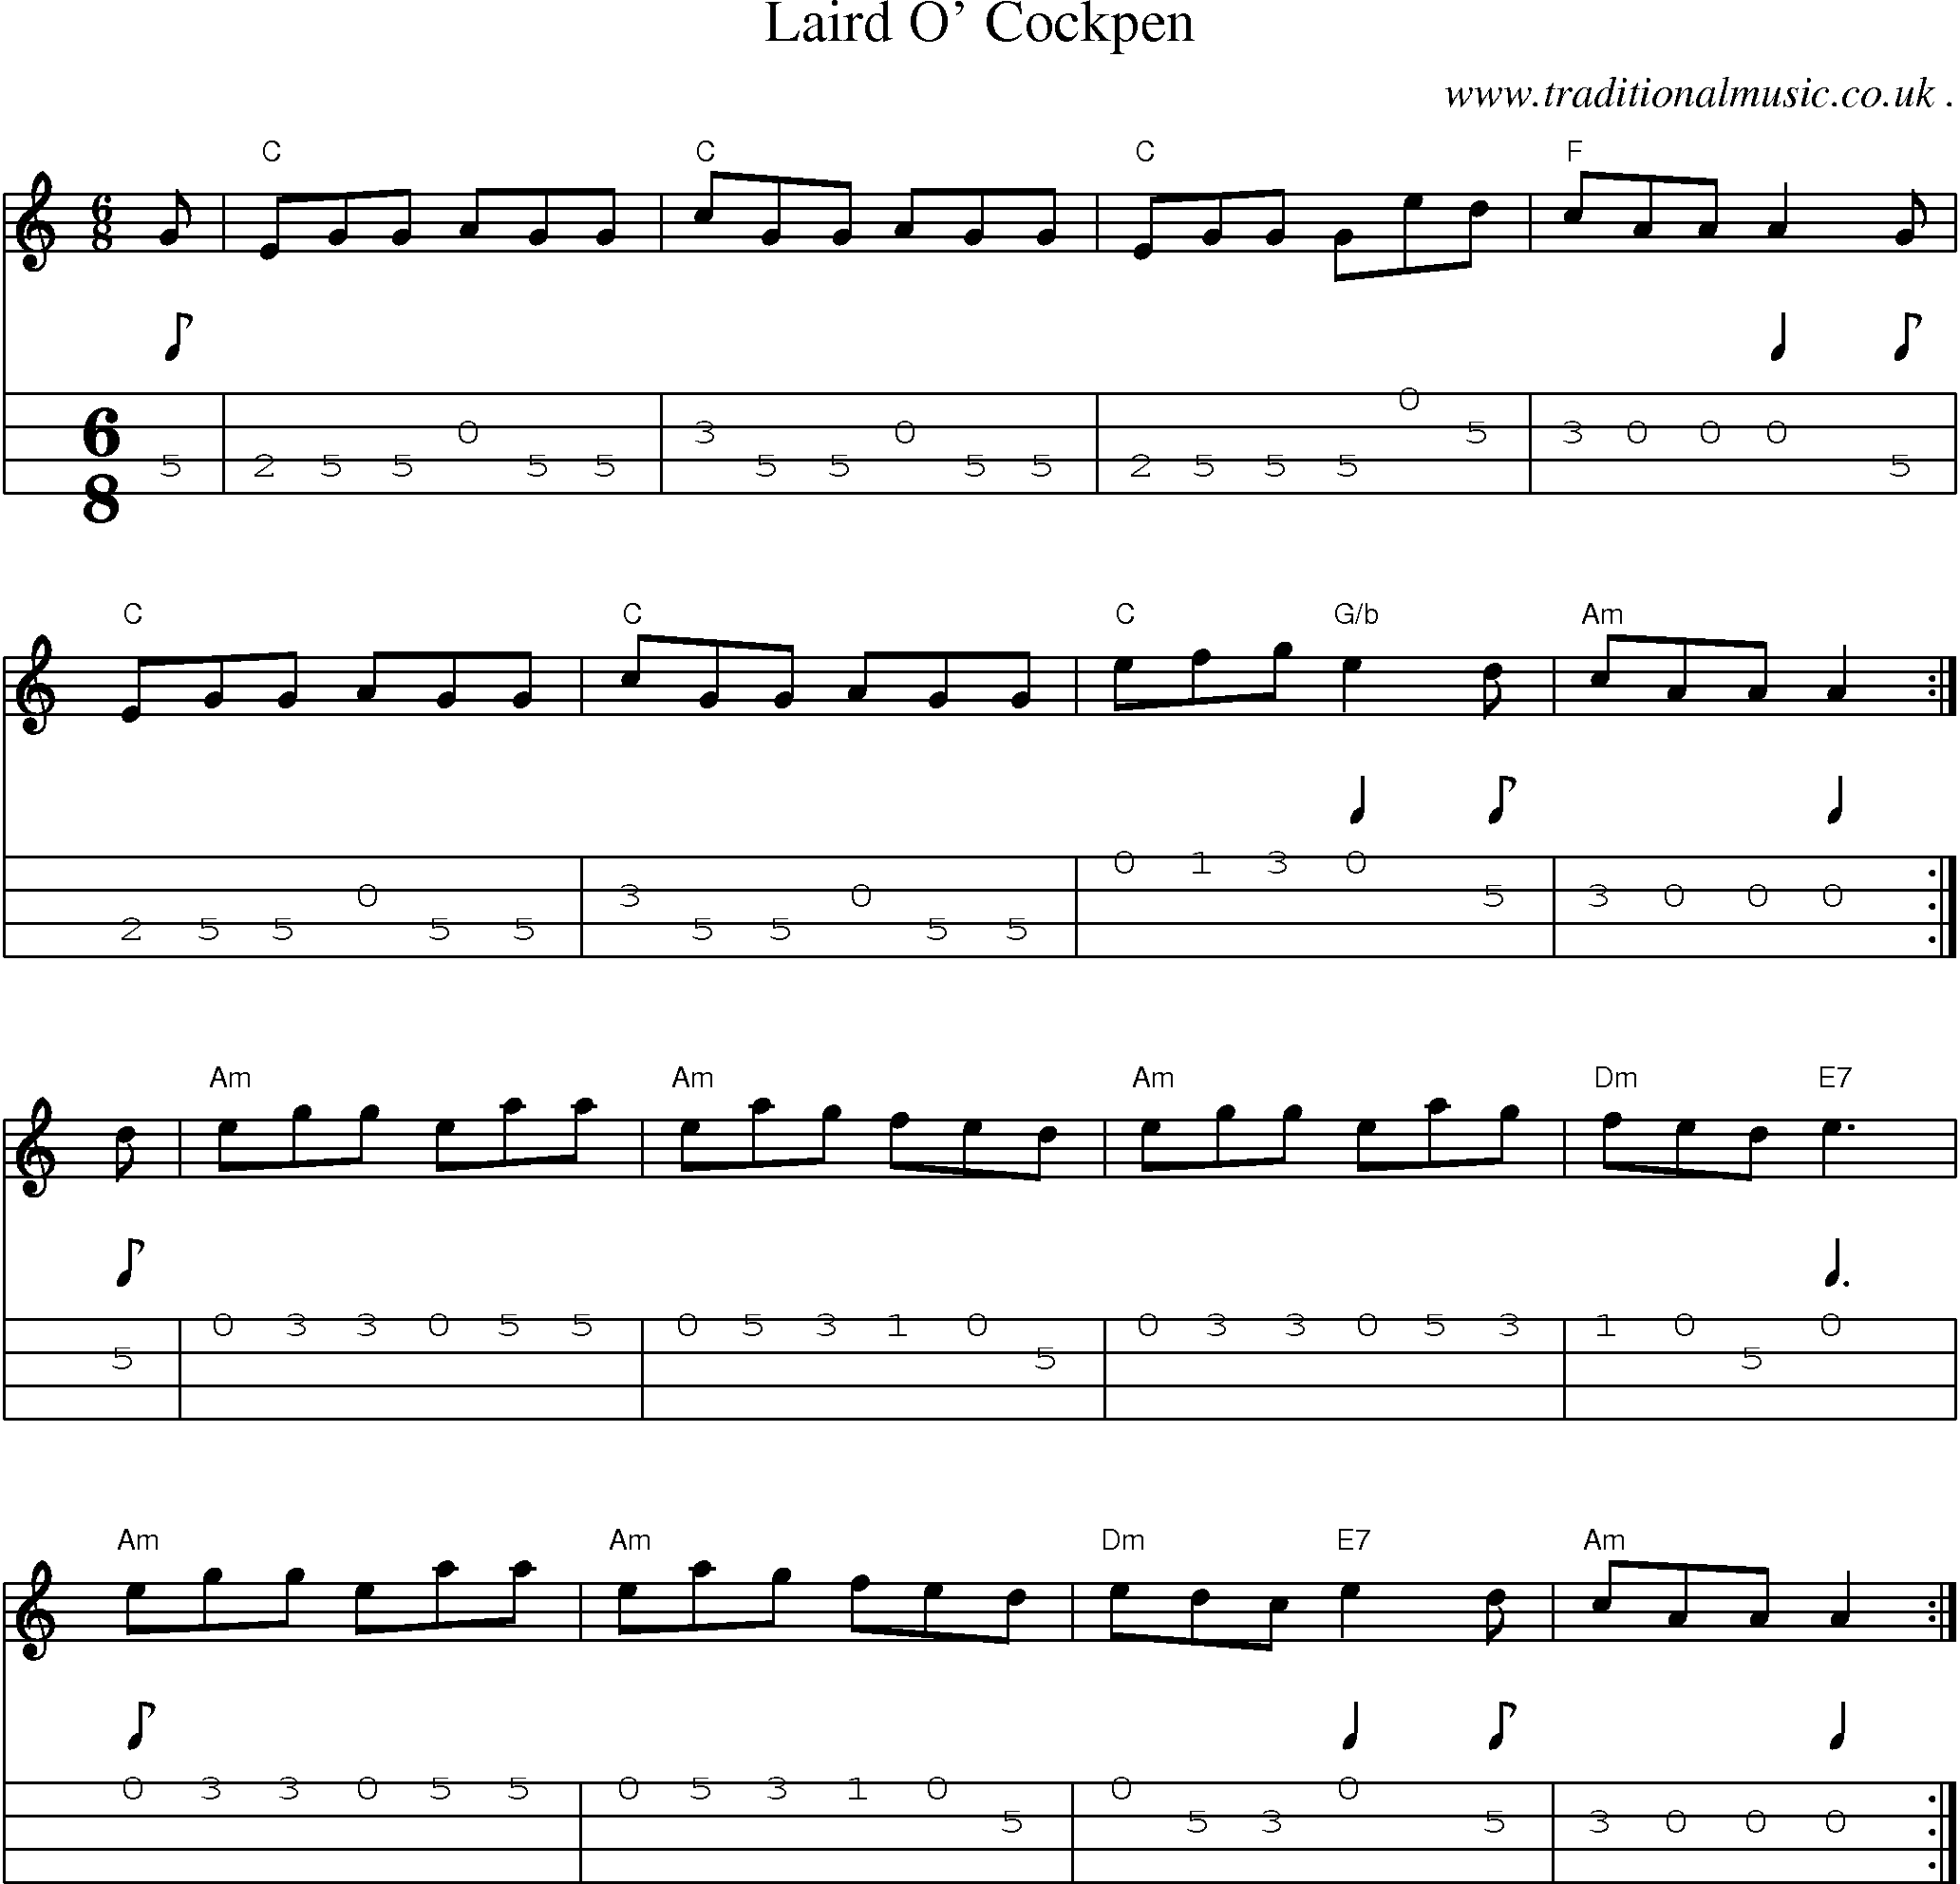 Sheet-music  score, Chords and Mandolin Tabs for Laird O Cockpen